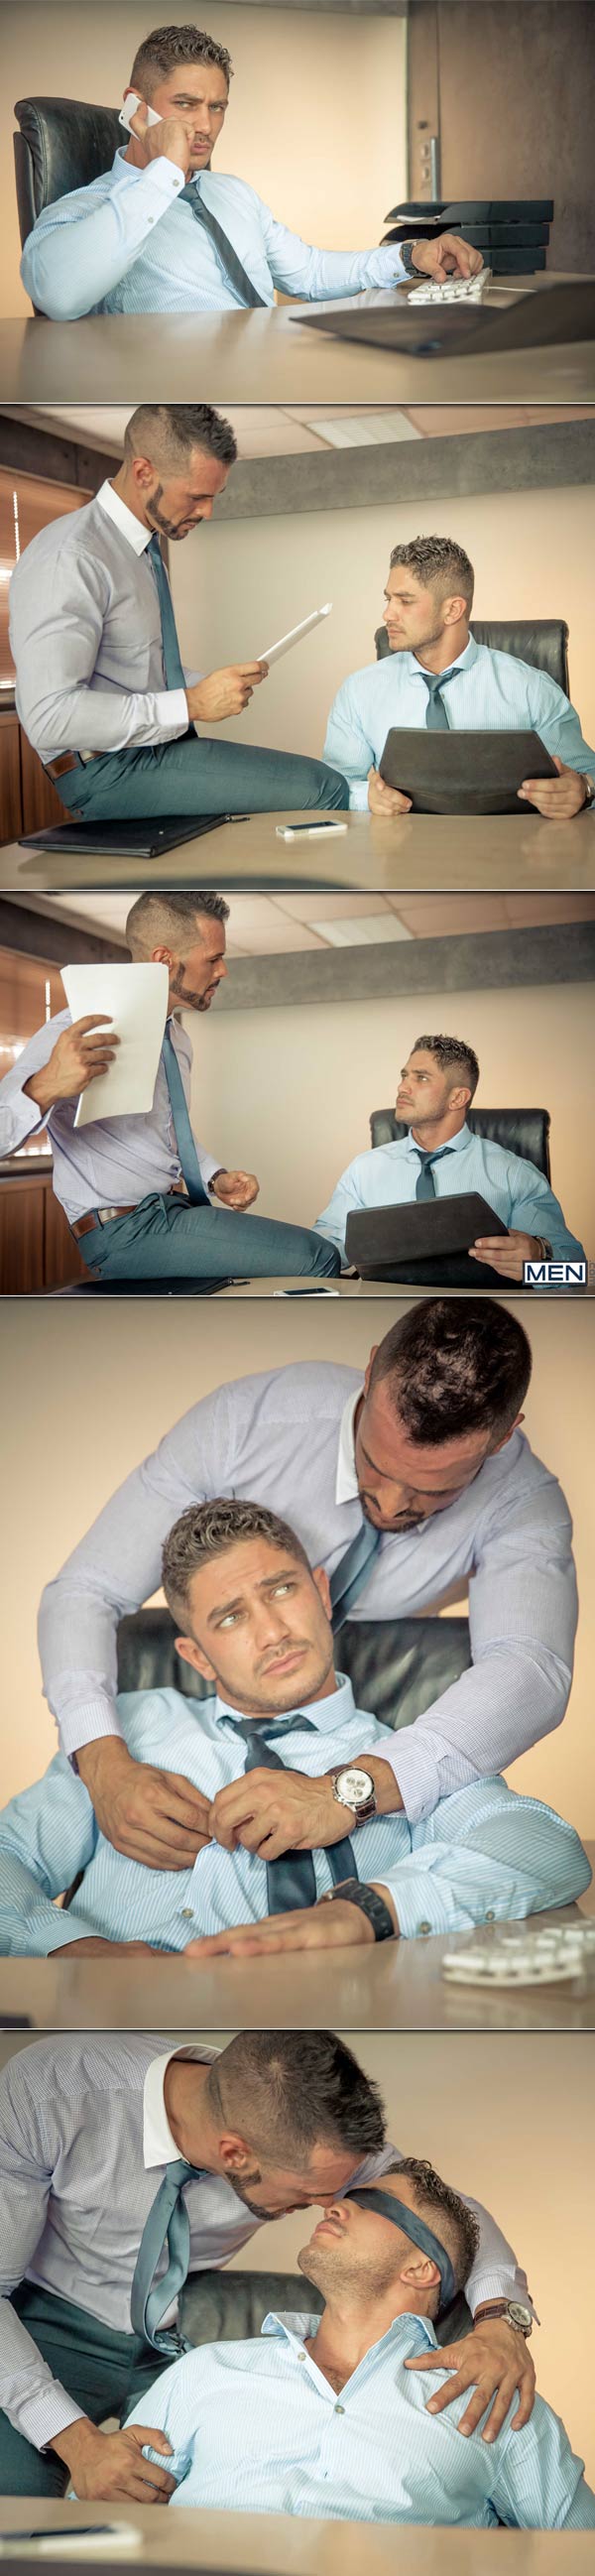 The Business of Sex (Dato Foland and Denis Vega) (Part 1) at The Gay Office